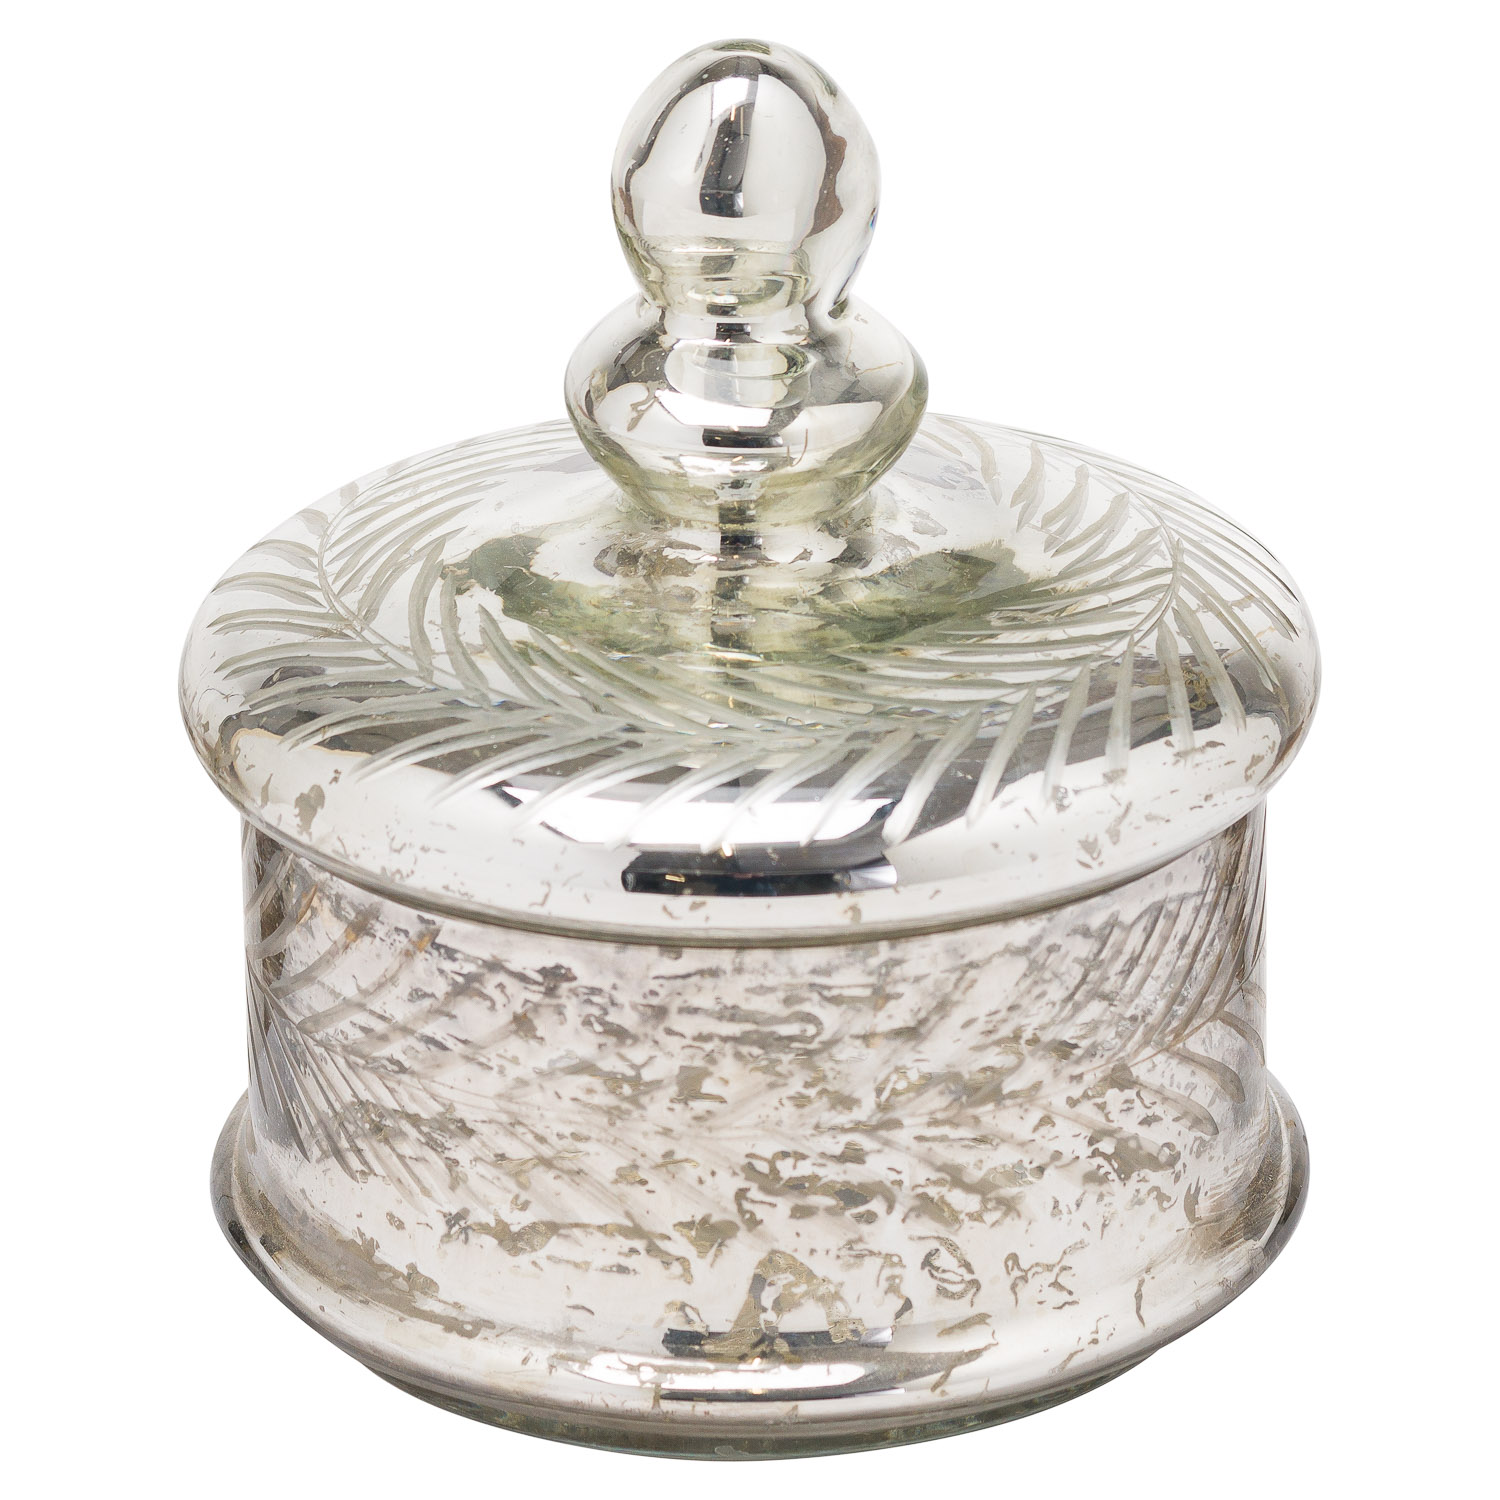 The Noel Collection Silver Foil Effect Small Trinket Jar - Image 1